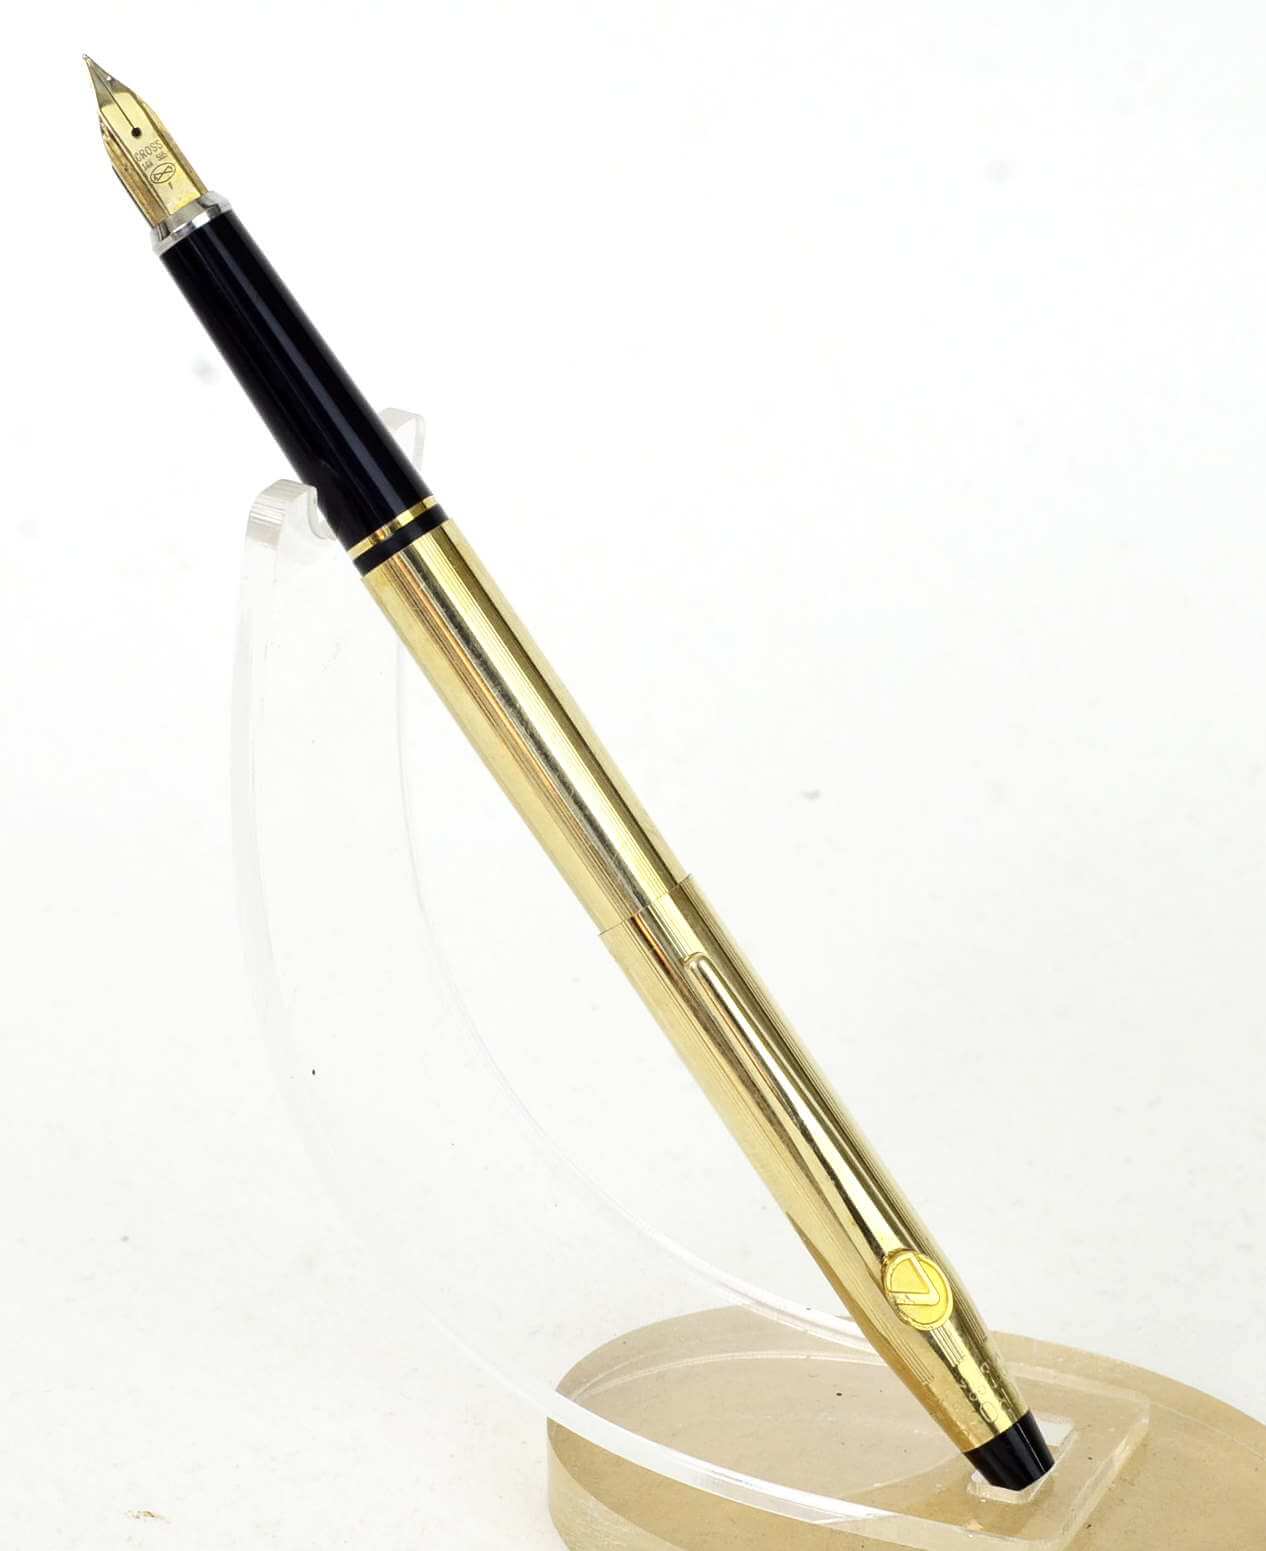 CROSS Classic Century Medalist Fountain Pen with 23CT Gold-Plated Appointments and Fine Nib incl Refillable Cartridge Pen Premium Gift Box 